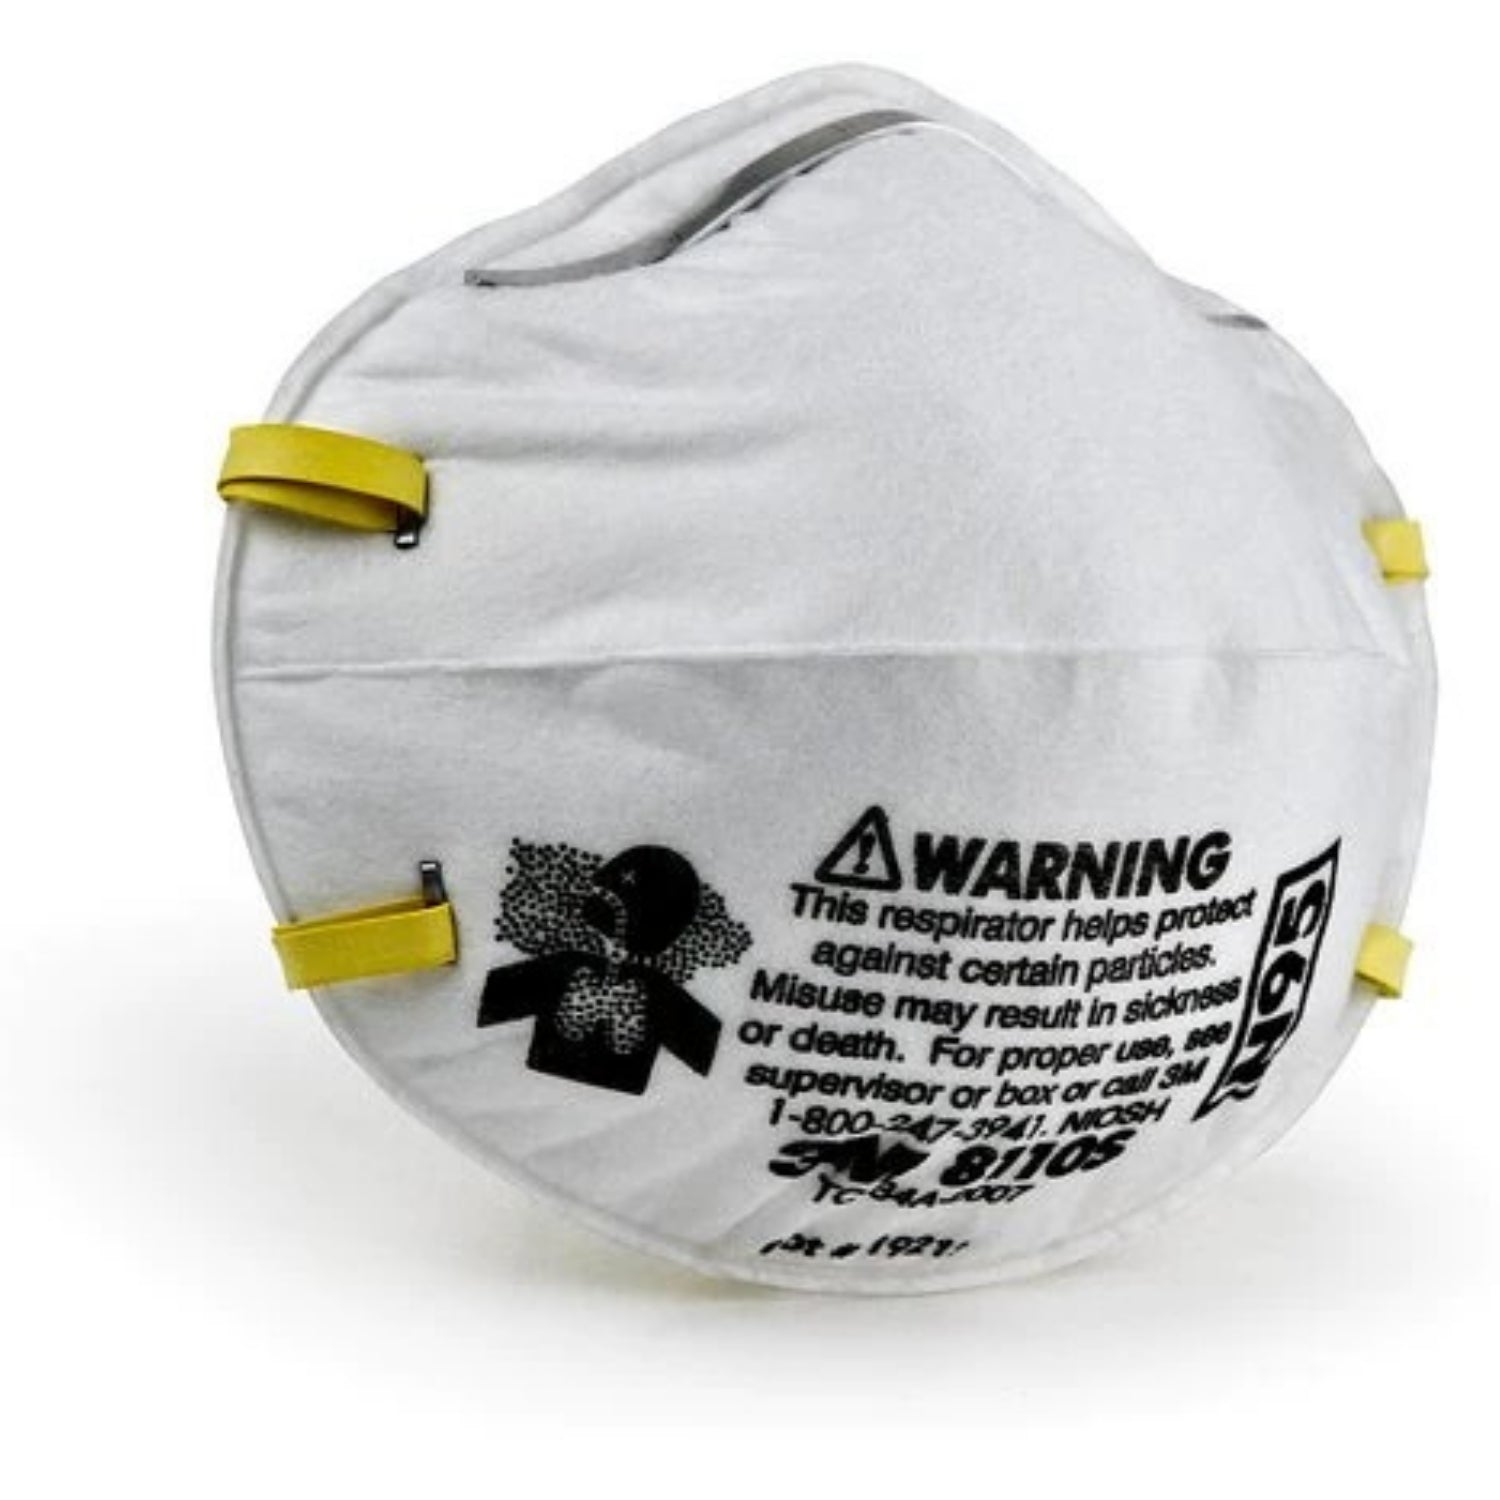 3M™ Particulate Respirator 8110S, N95 - Half Facepiece, Two fixed straps, Small